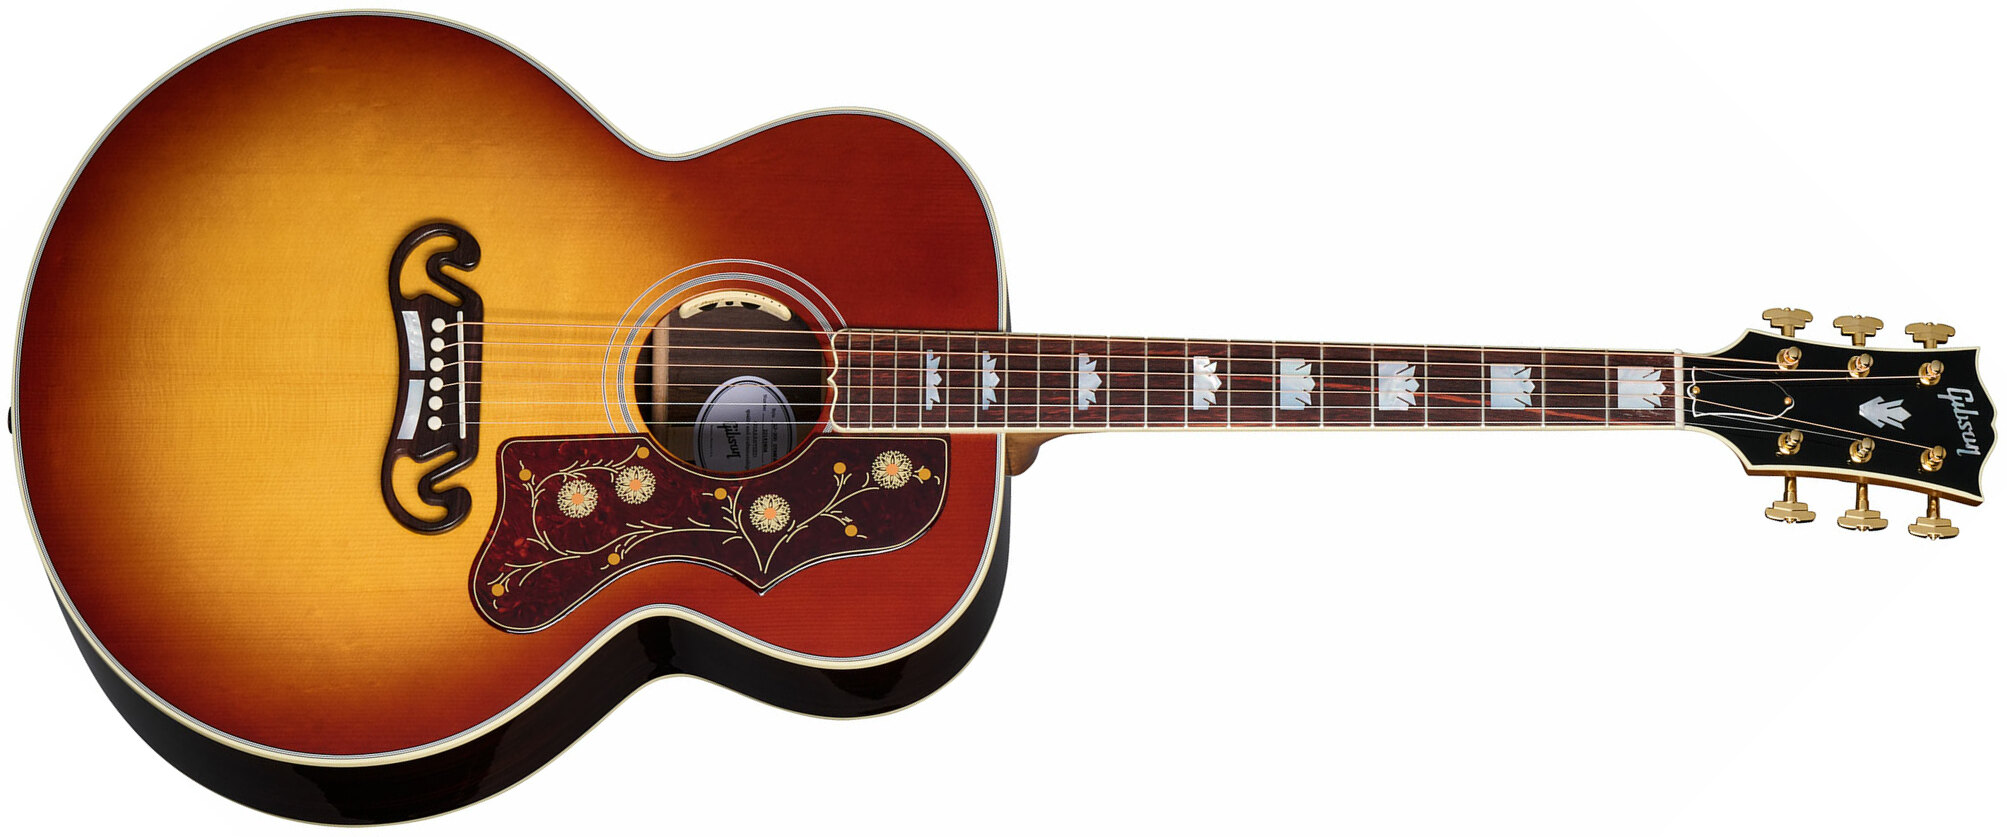 Gibson Sj-200 Standard Rosewood Super Jumbo Epicea Palissandre Rw - Rosewood Burst - Electro acoustic guitar - Main picture